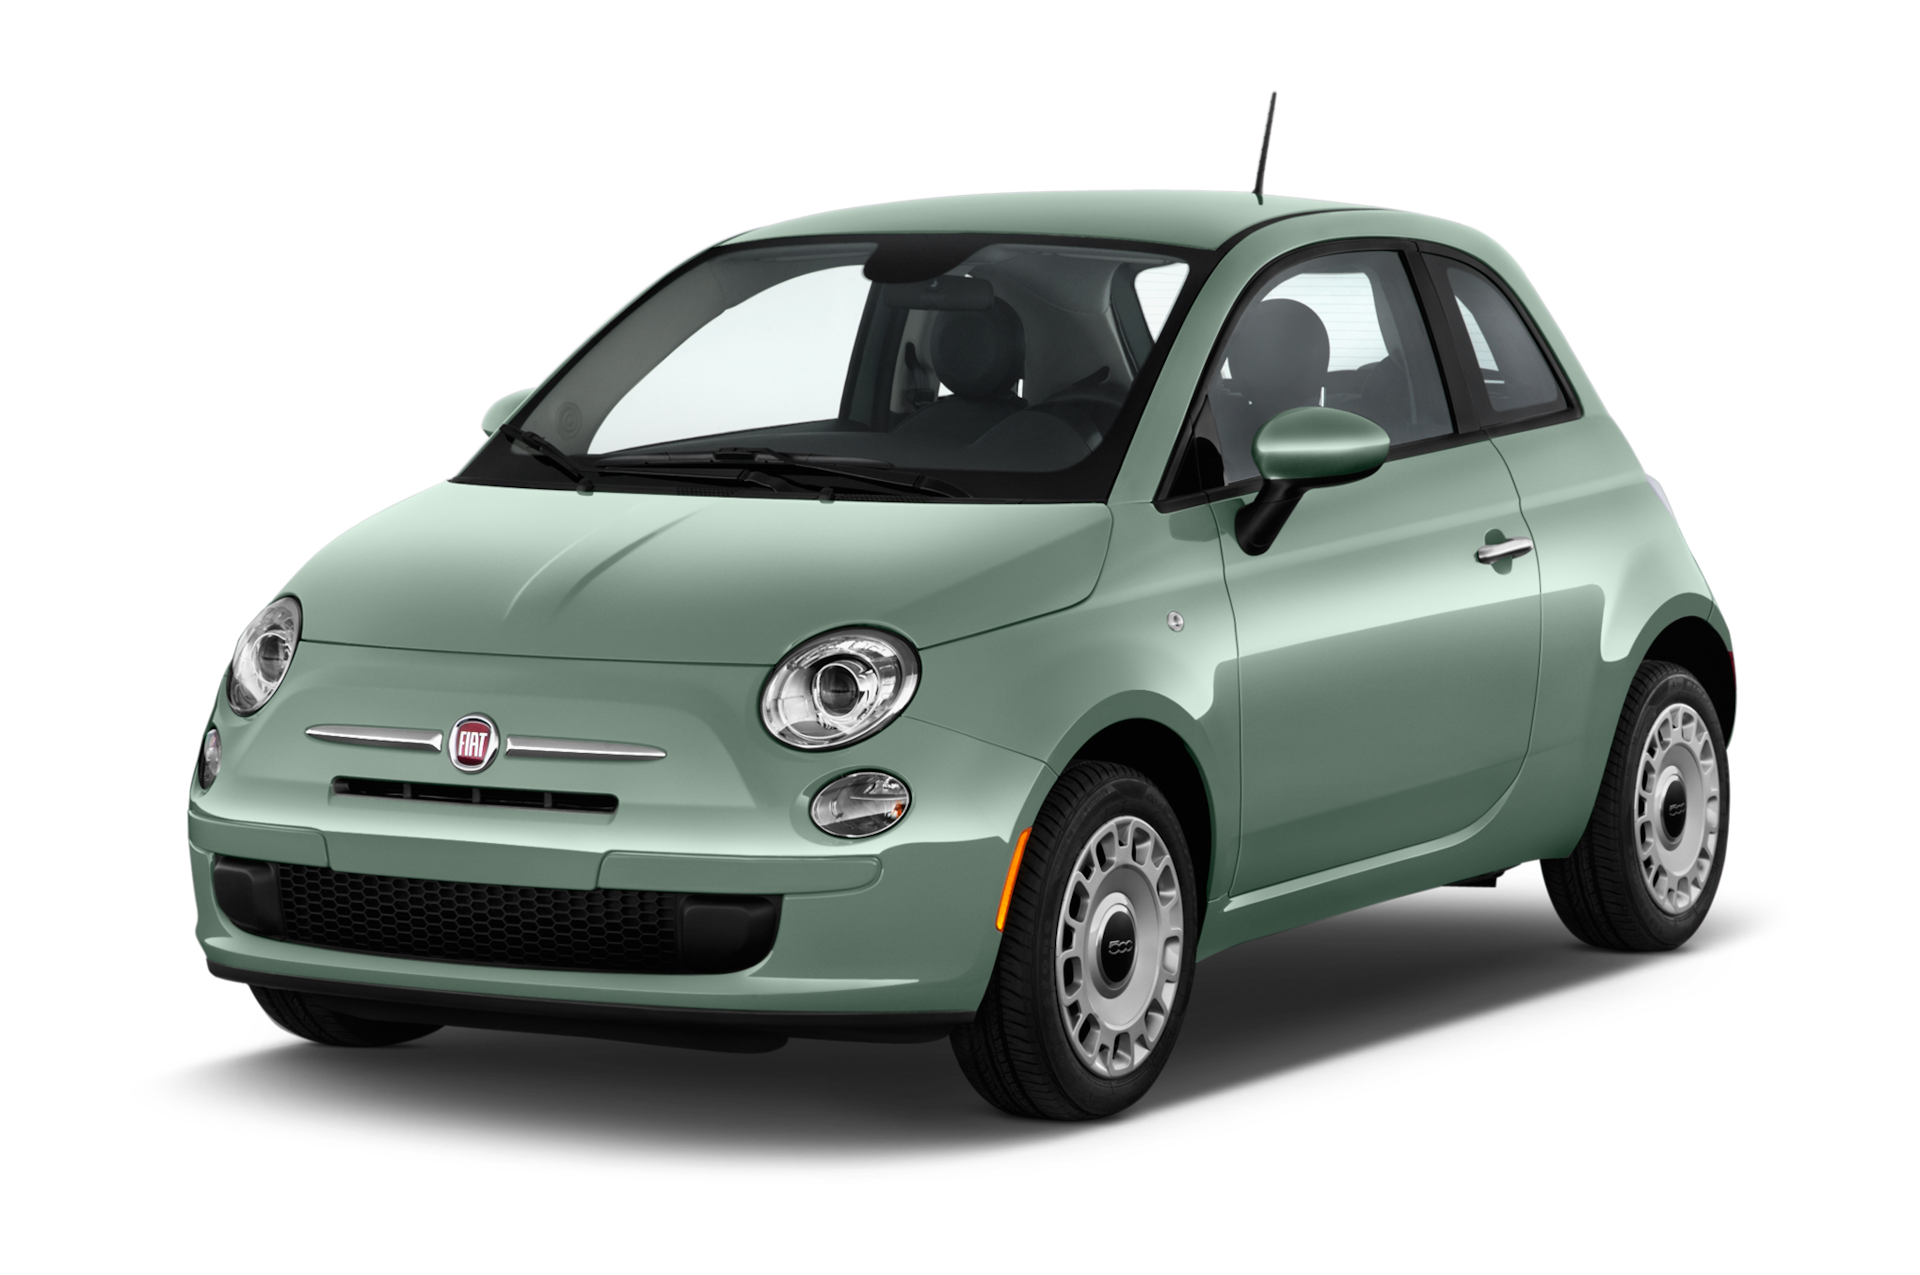 2016 FIAT 500 Prices, Reviews, and Photos - MotorTrend